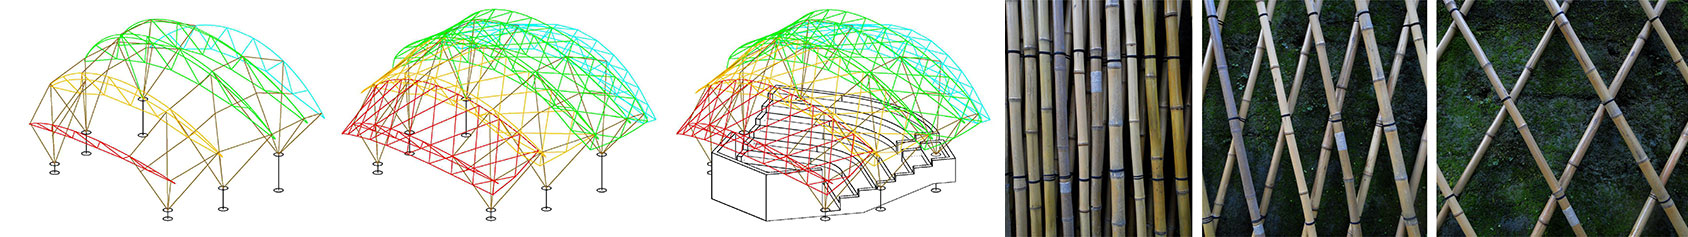 Active-bending-and-tensile-pantographic-bamboo-hybrid-amphitheater-structure-Journal-of-IASS.jpg